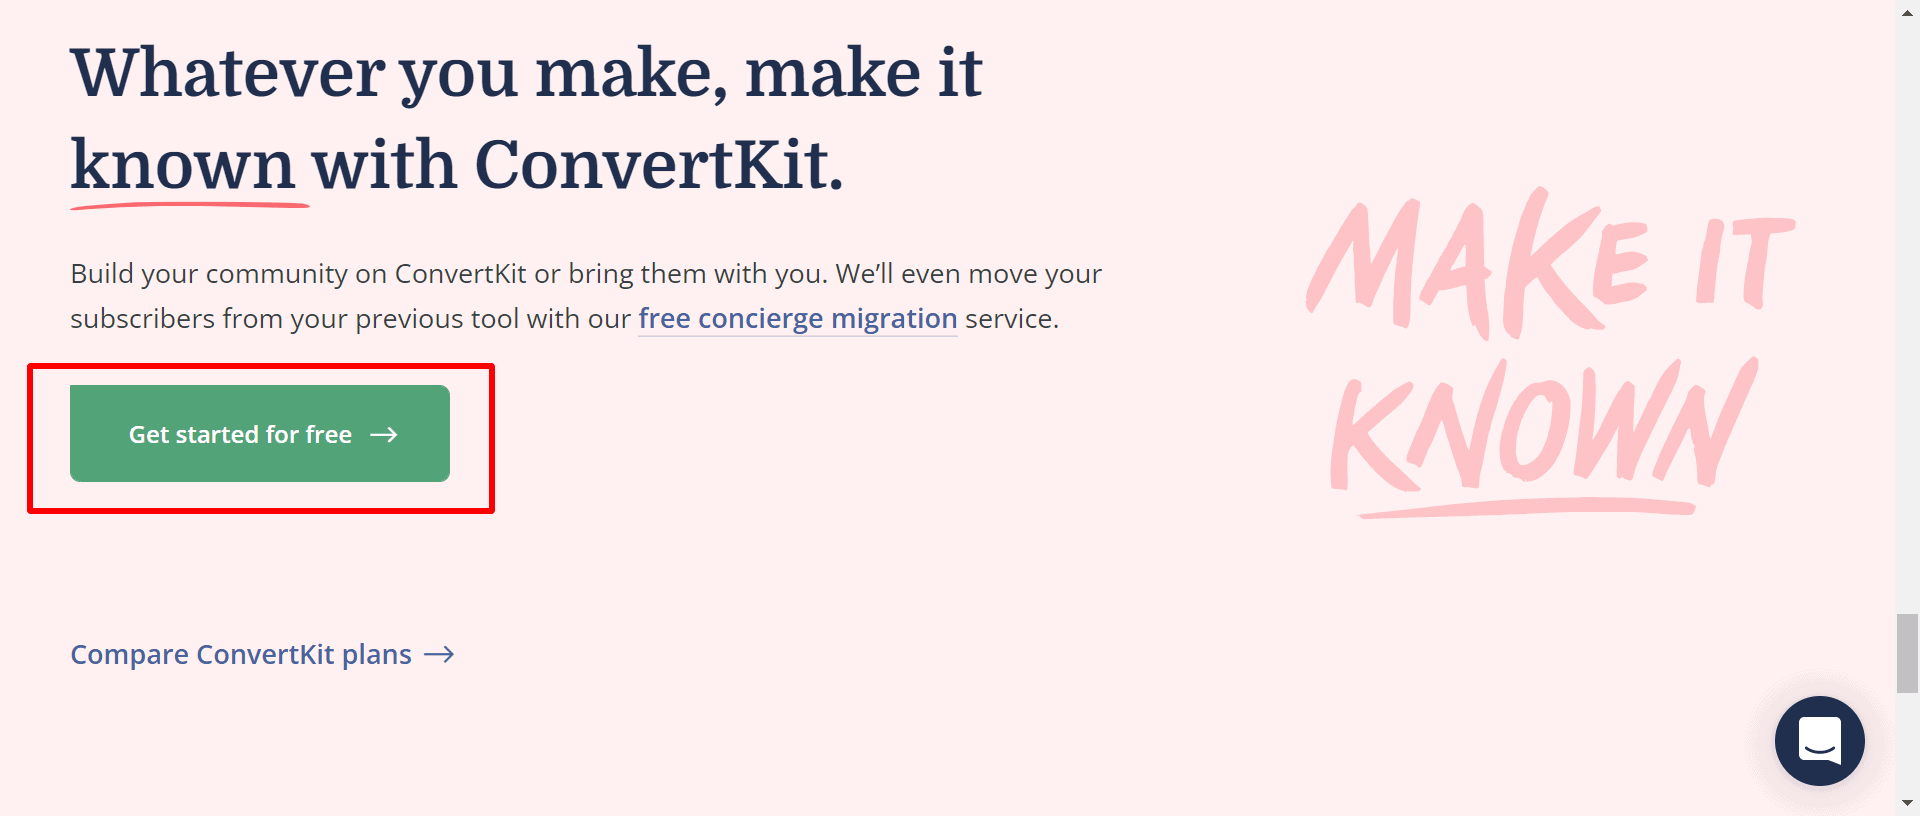 ConvertKit-for-free